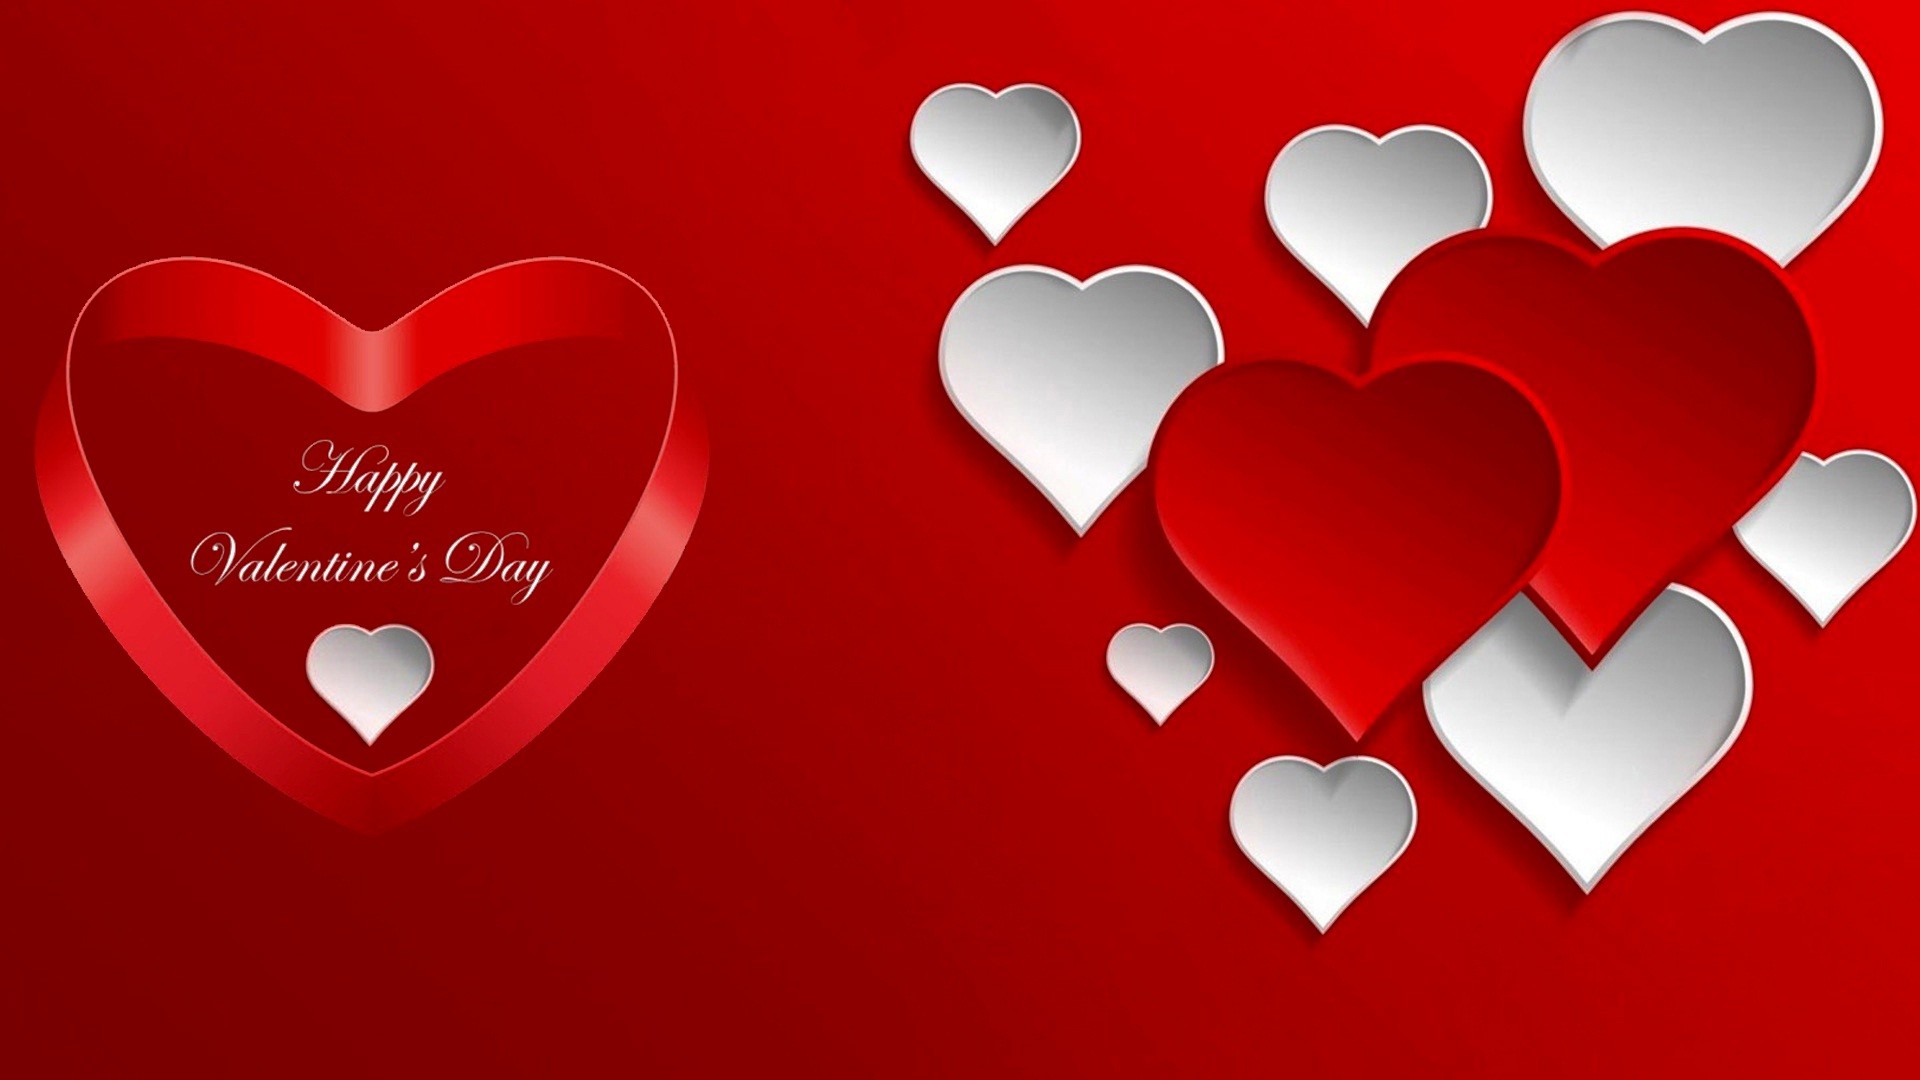 1920x1080, White And Red 3d Hearts Love Wallpapers - Valentines Day Images 2019 Download - HD Wallpaper 